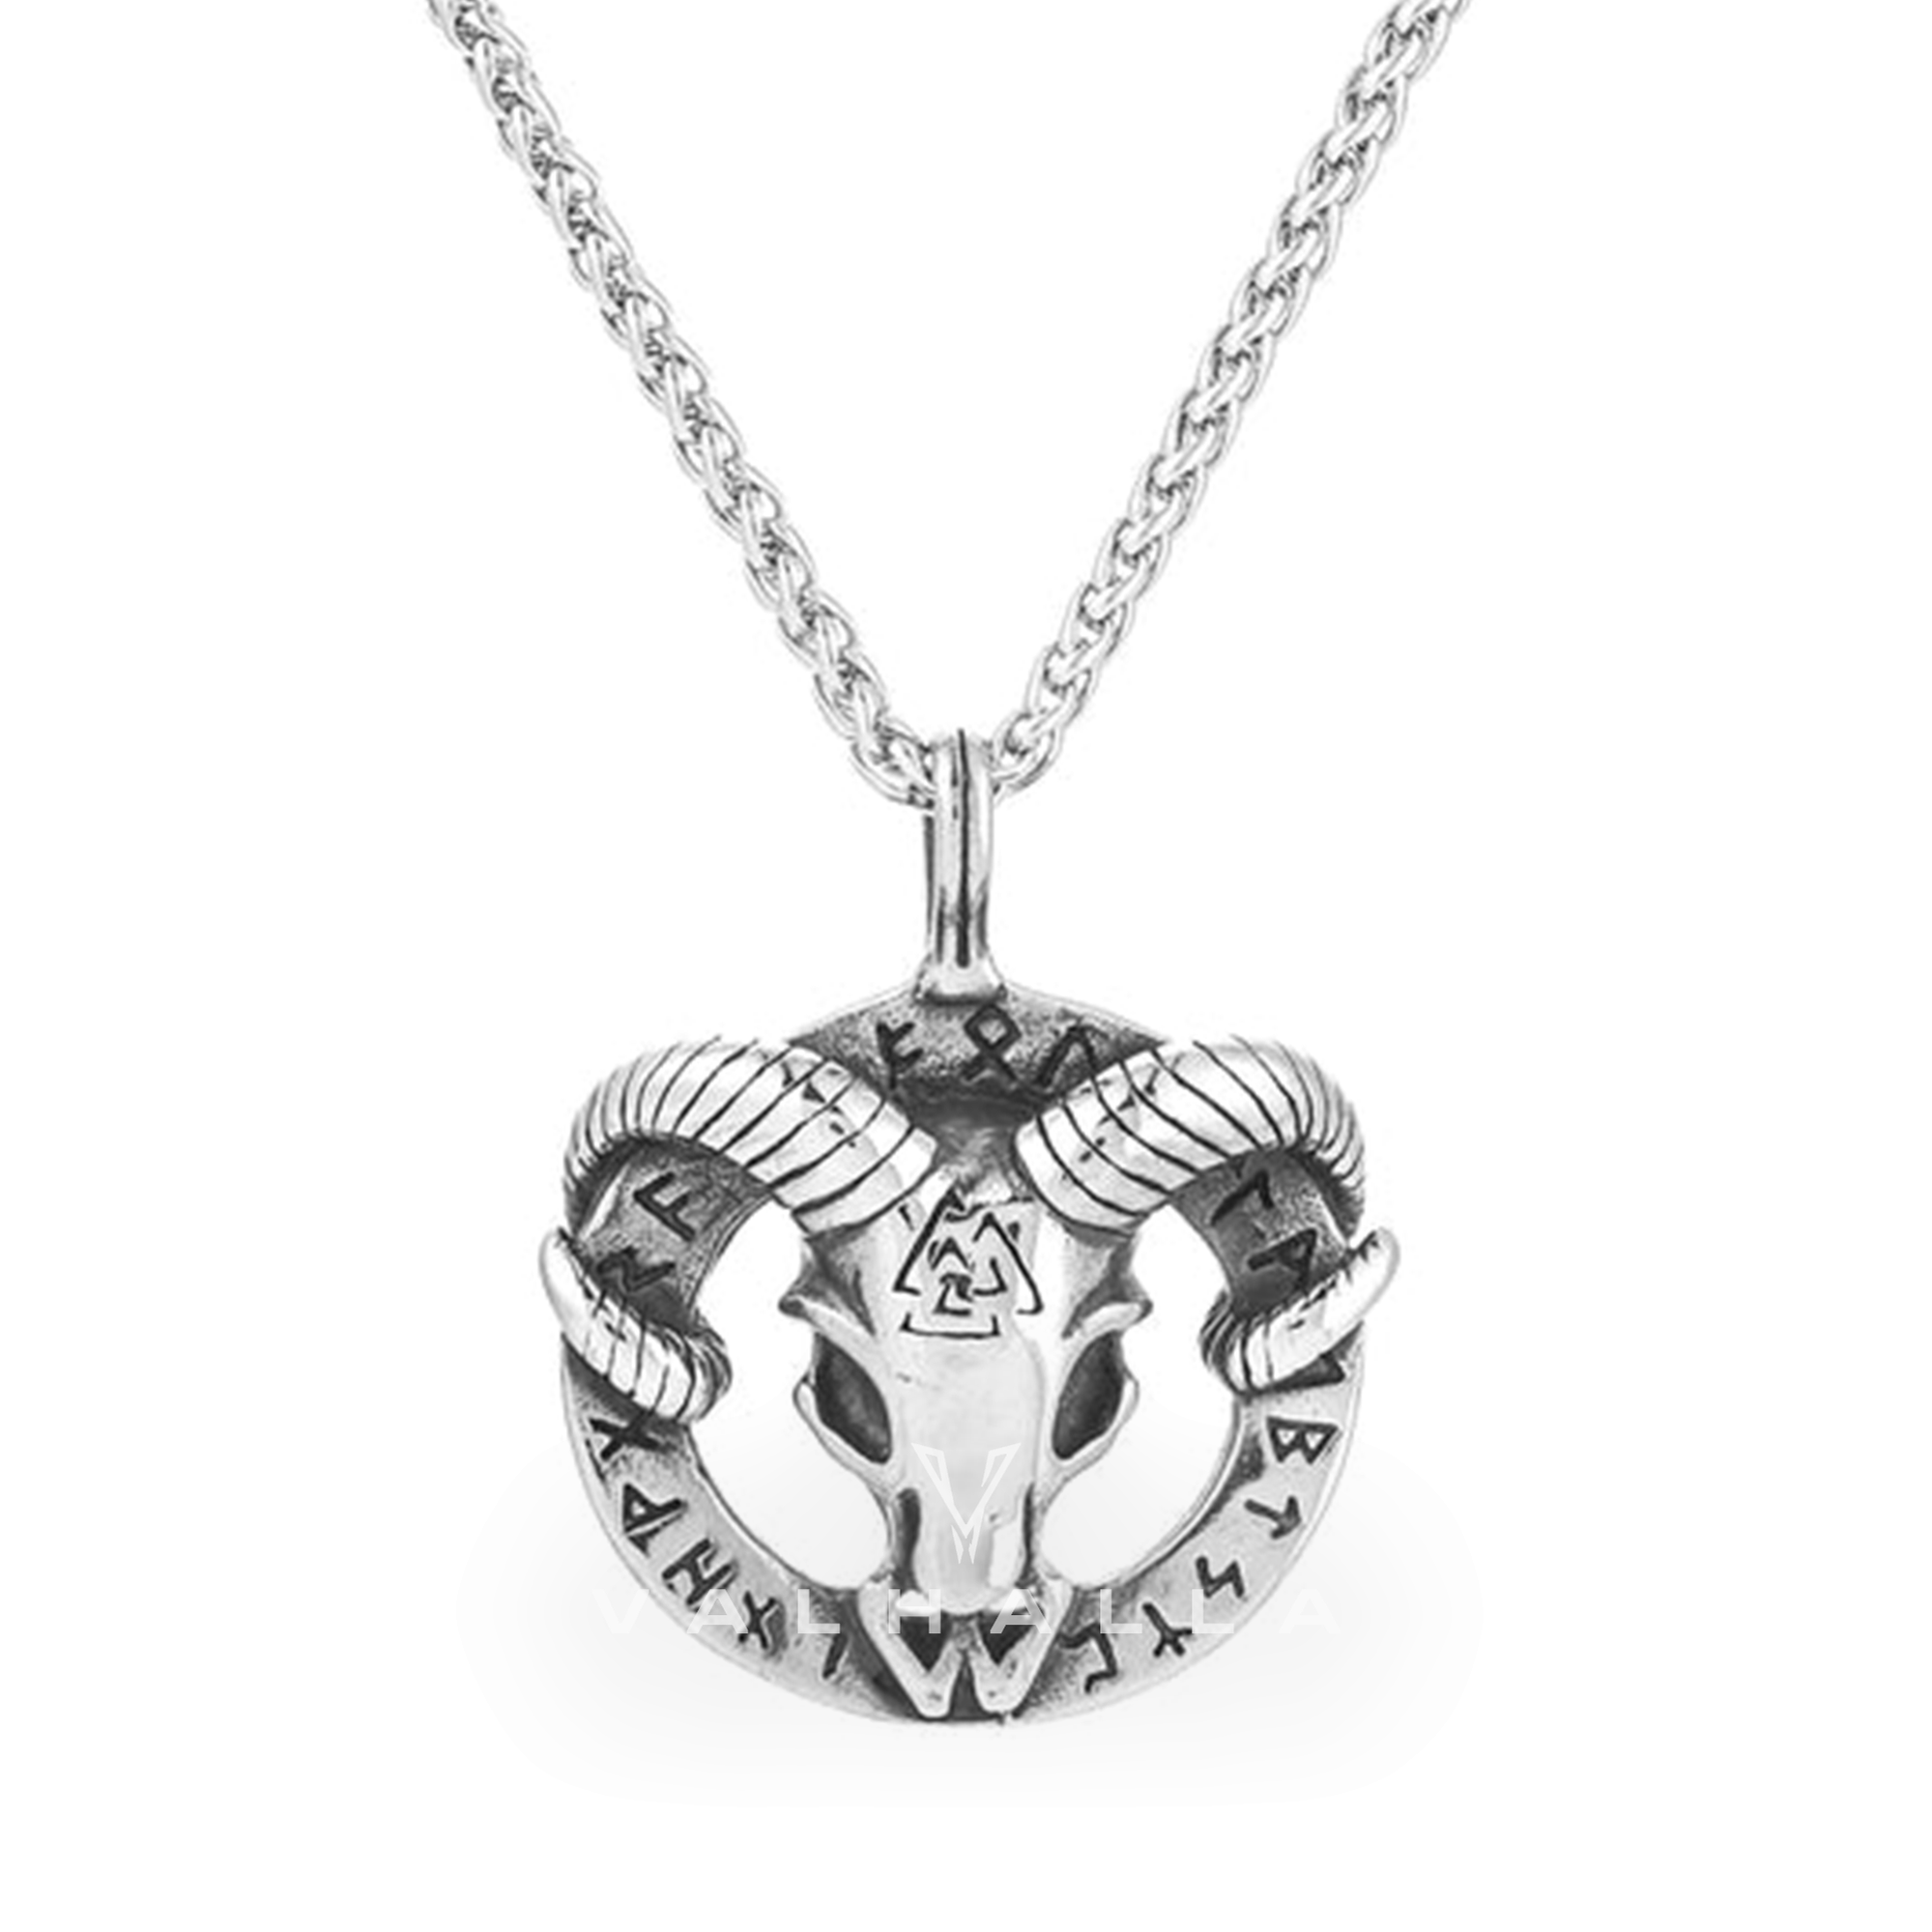 Handcrafted Stainless Steel Goat Head Necklace with Valknut and Runes